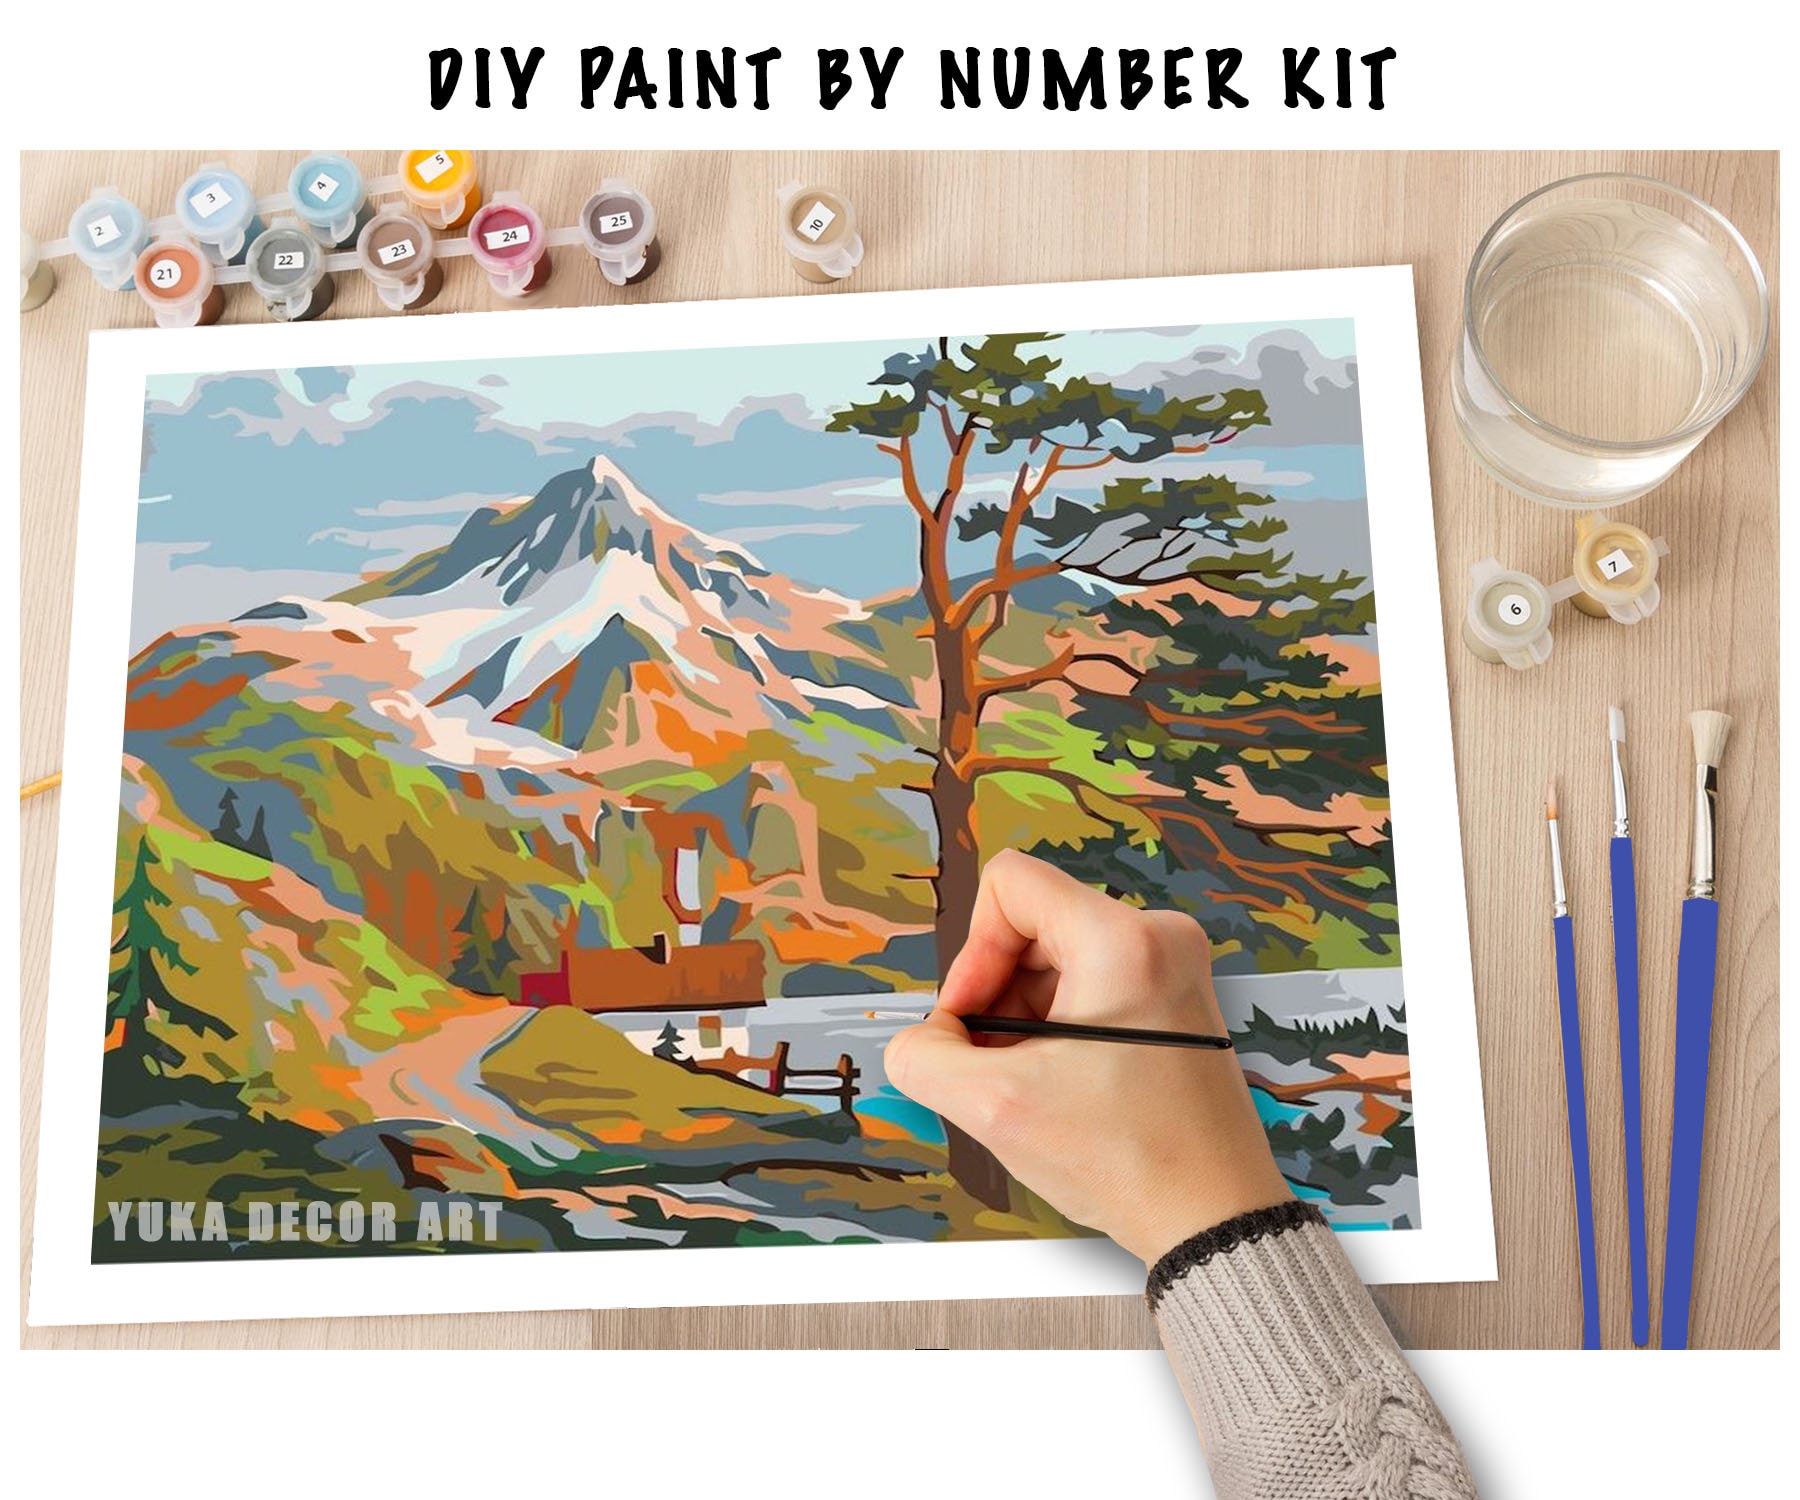  Paint by Number Kits for Adult Beginner Kids, Colorado Mountain  Ranch DIY Digital Oil Painting Kit Framed Canvas Kit Wooden Frame Art Wall  Decor 16x20